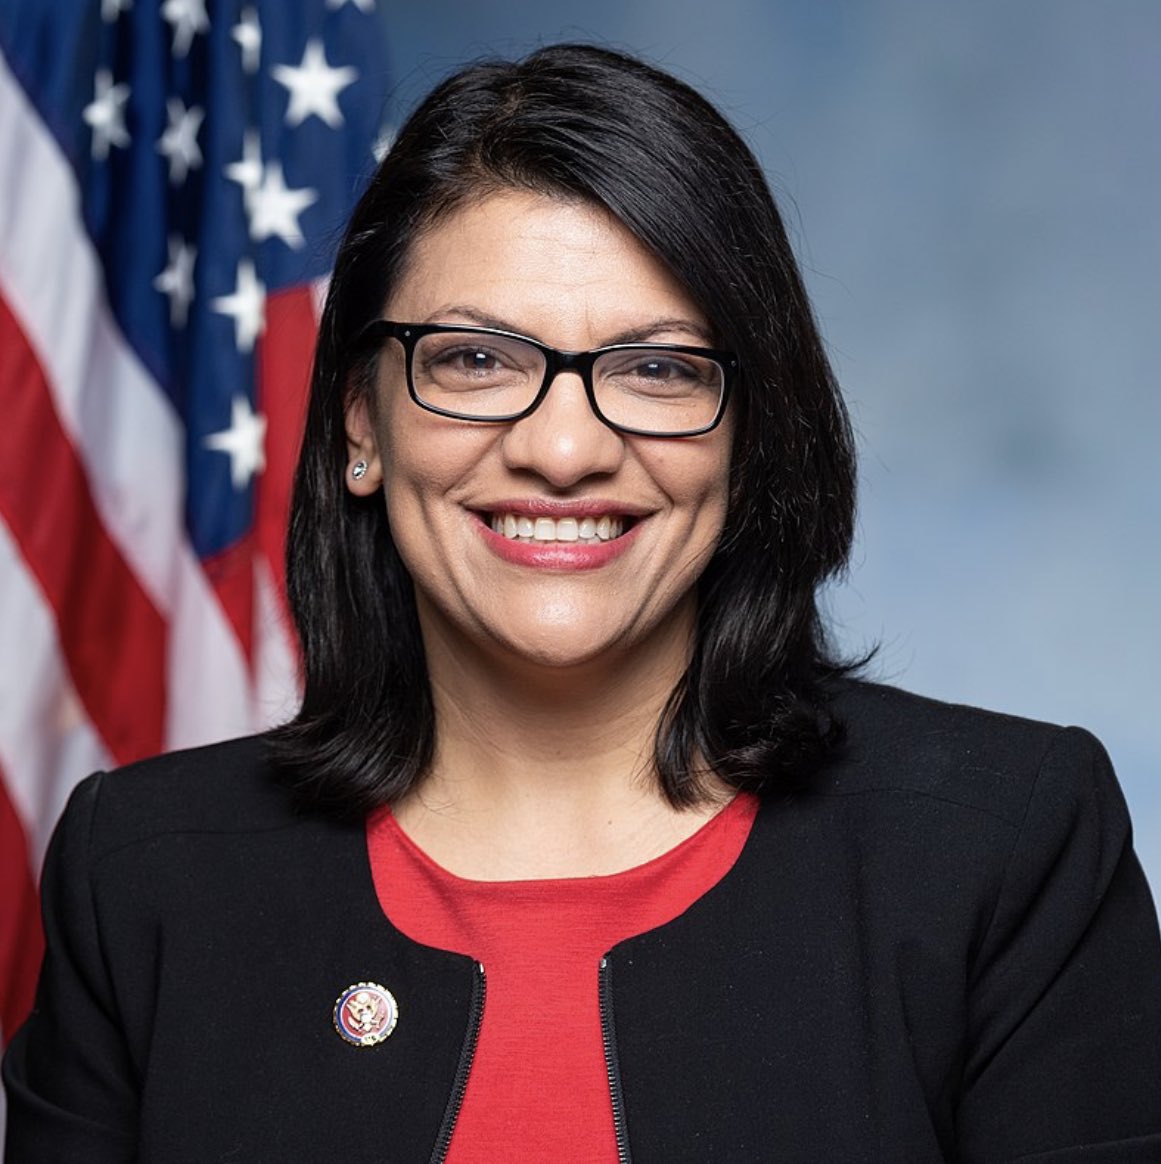 Rashida Tlaib should be removed from Congress… The enemy within! Agree?